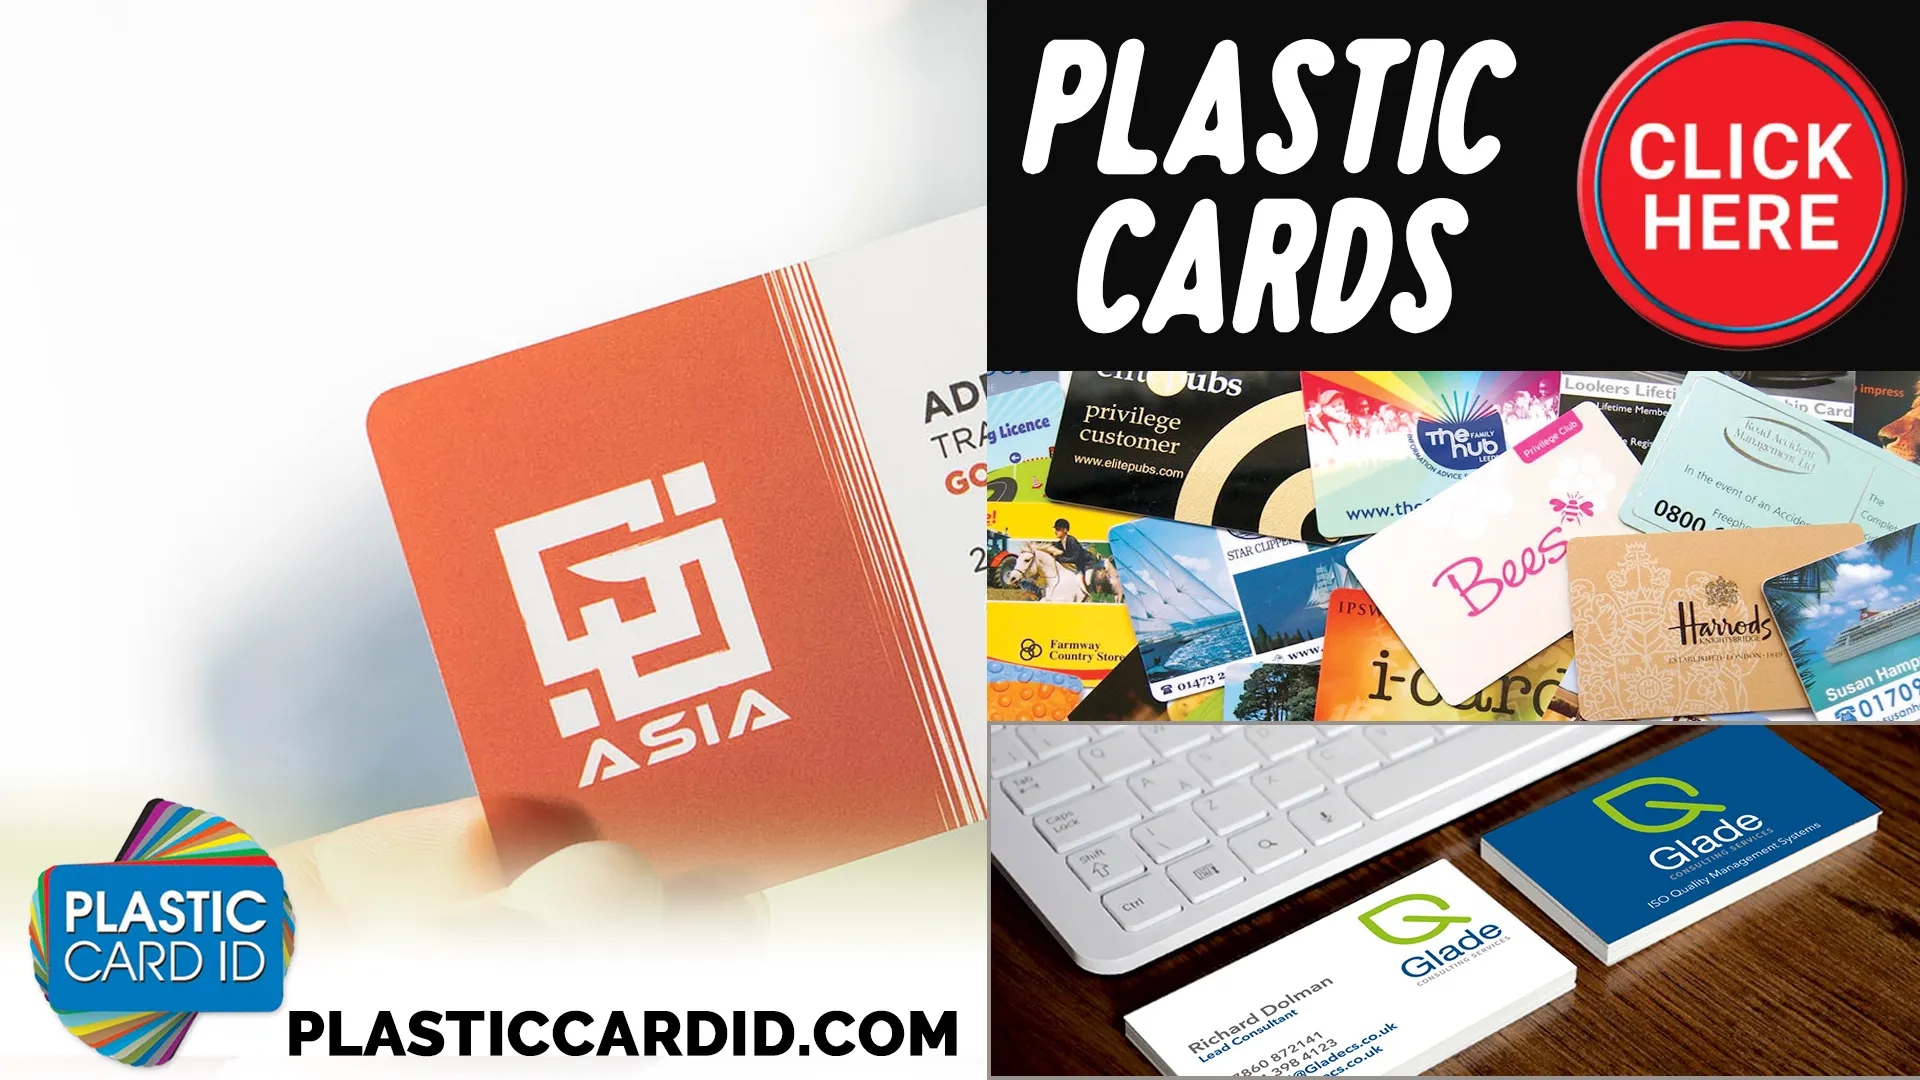 Plastic Card ID
's Commitment to Security and Privacy in Card Printing